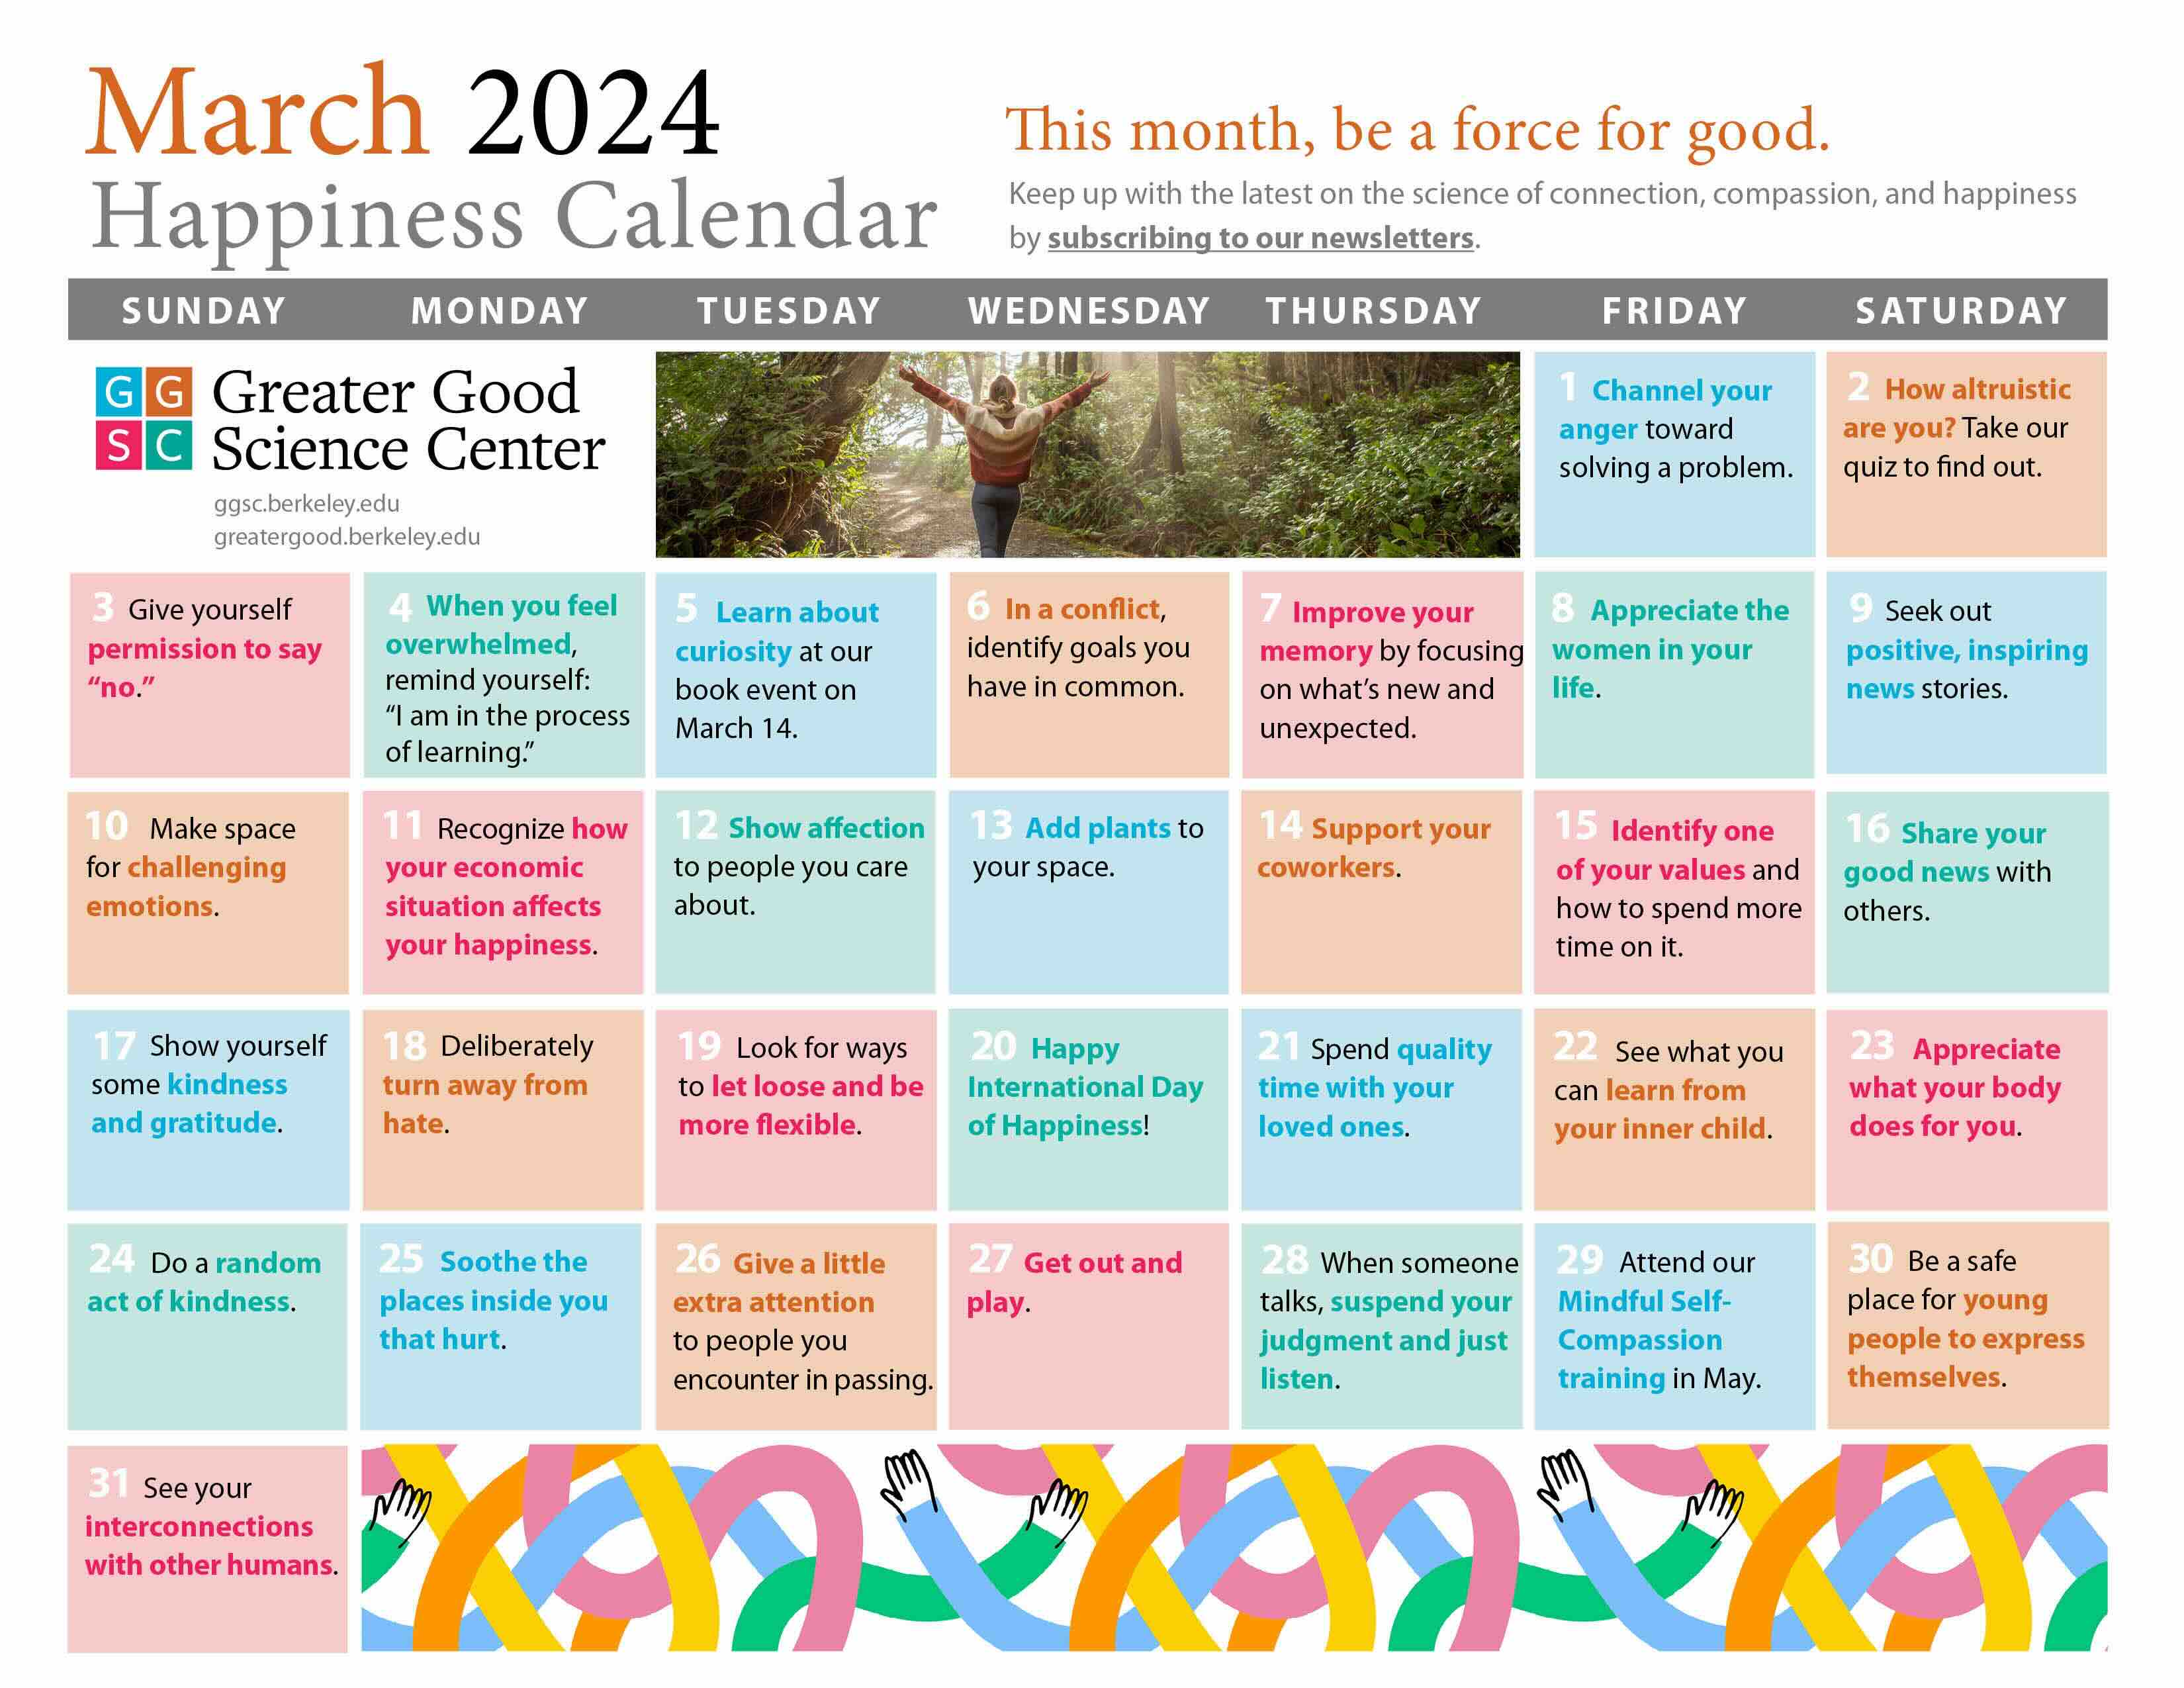 March 2024 happiness calendar